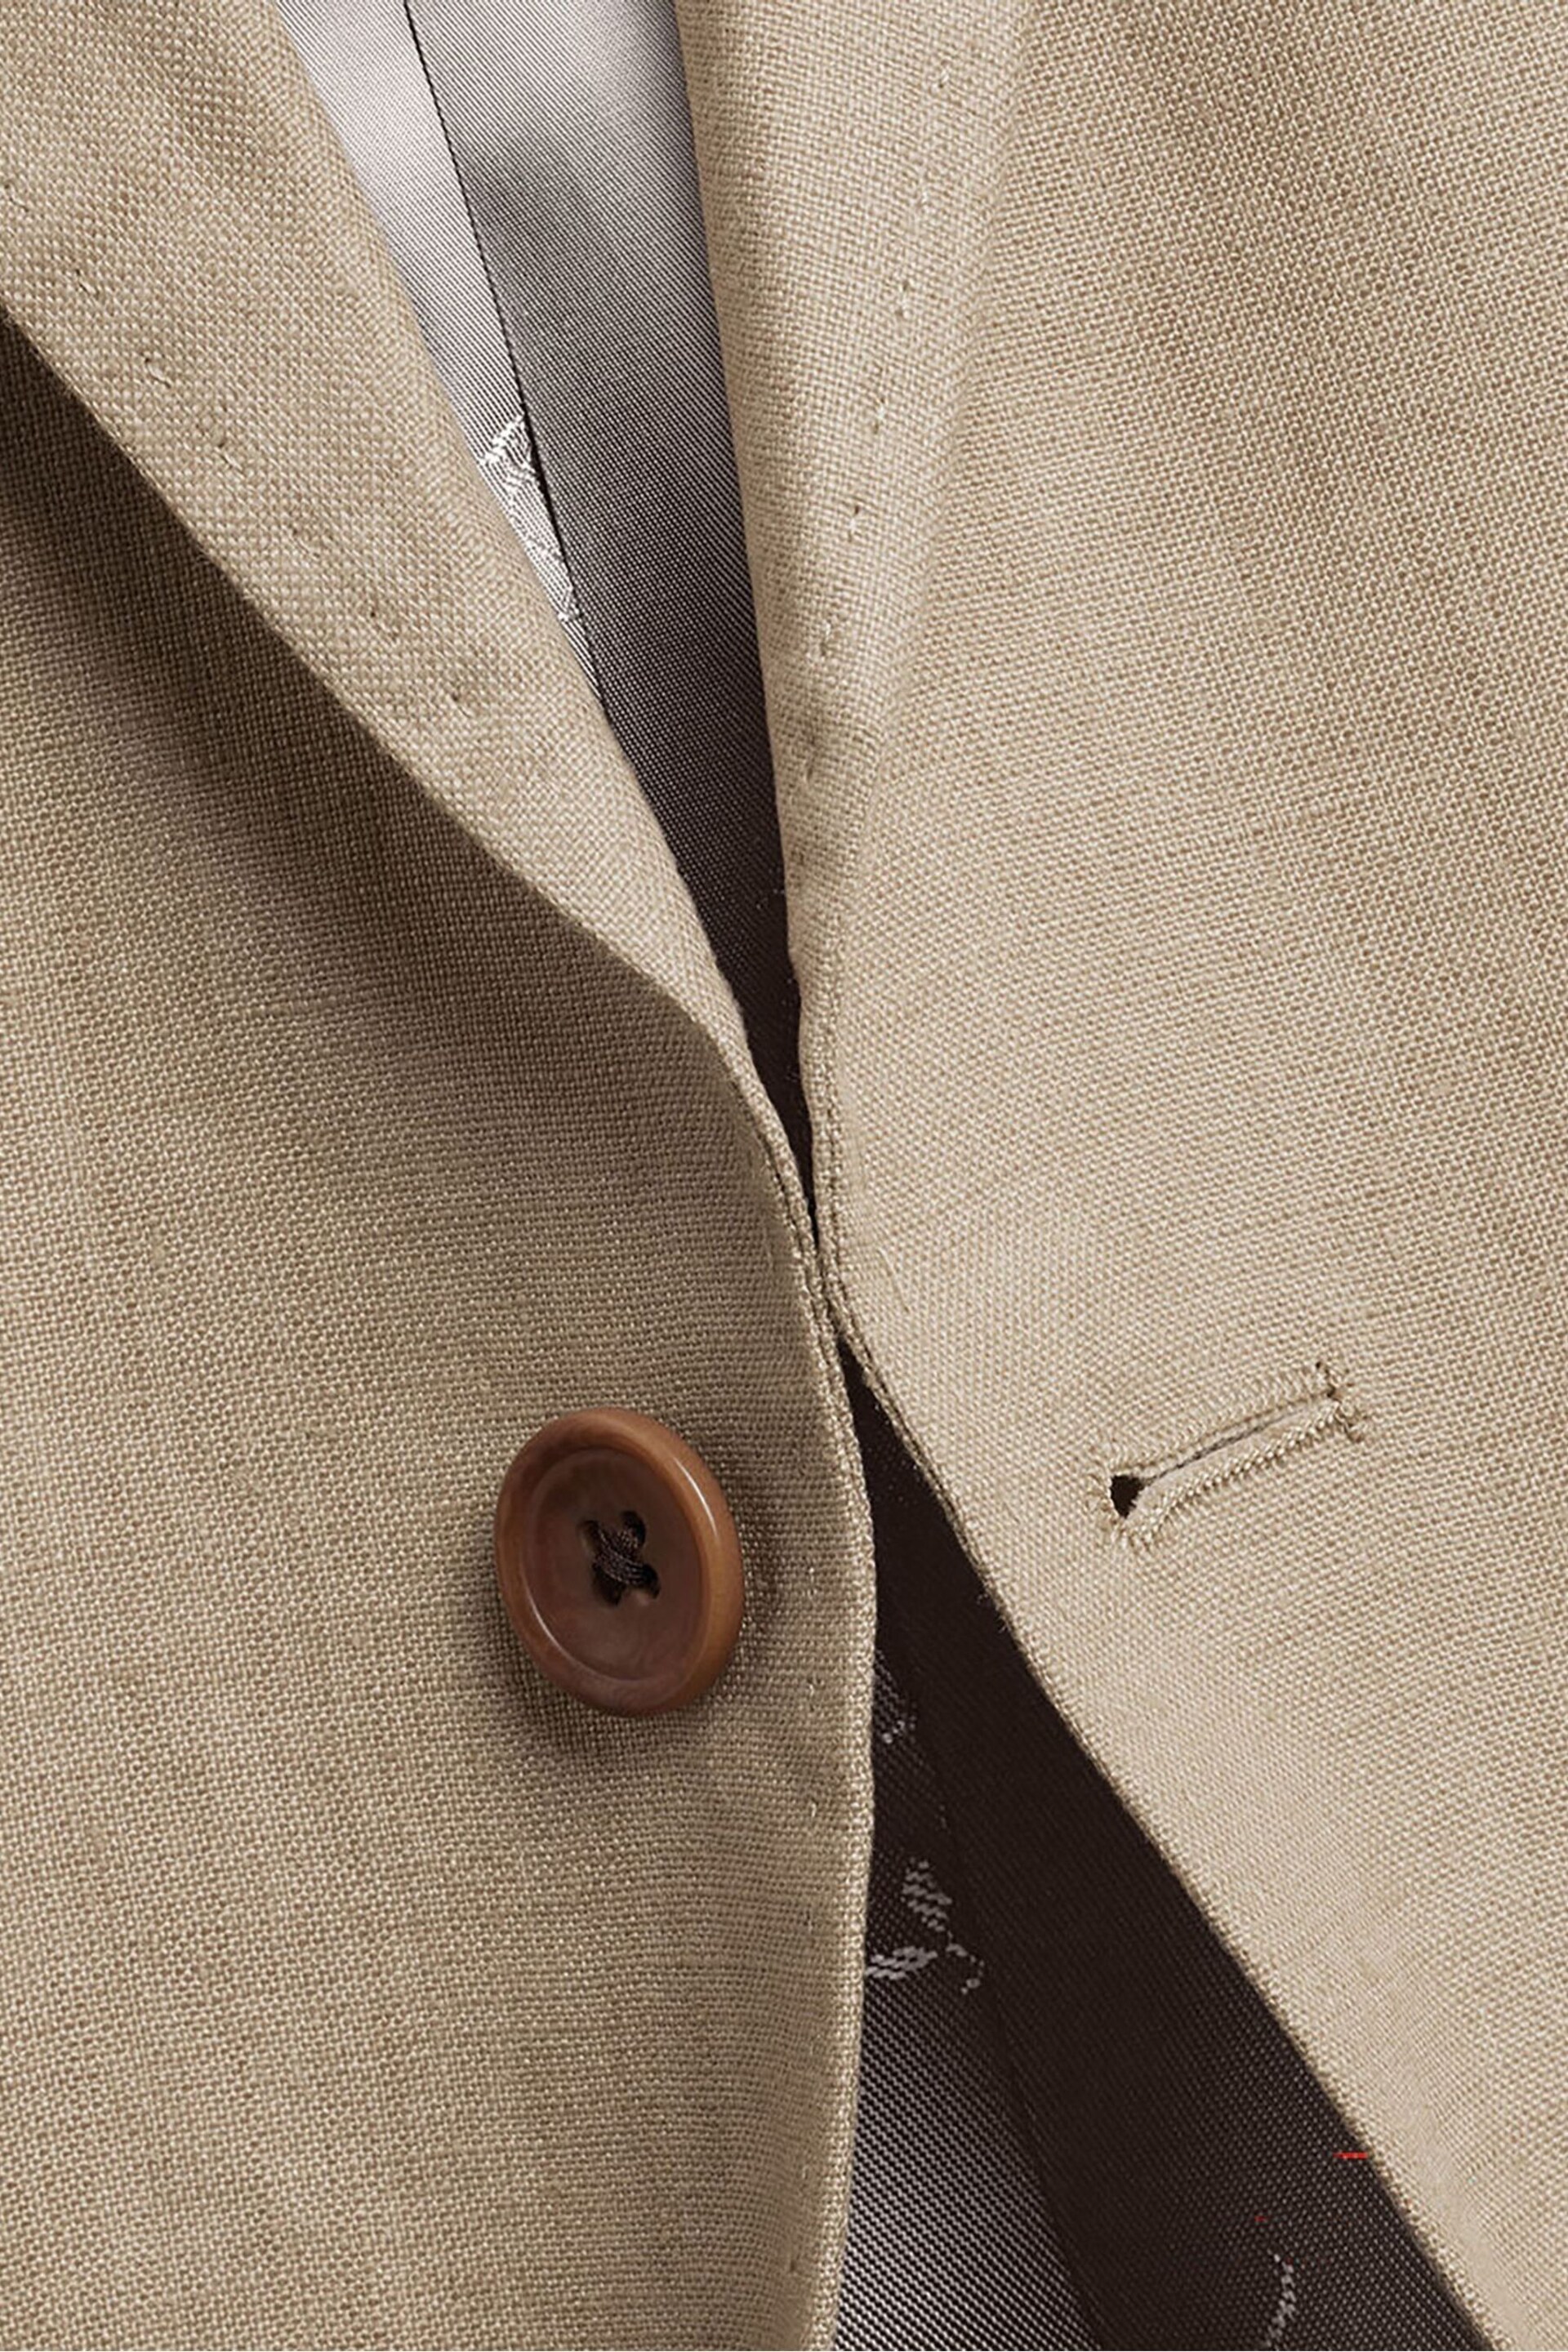 Charles Tyrwhitt Natural Linen Classic Fit Jacket - Image 4 of 4